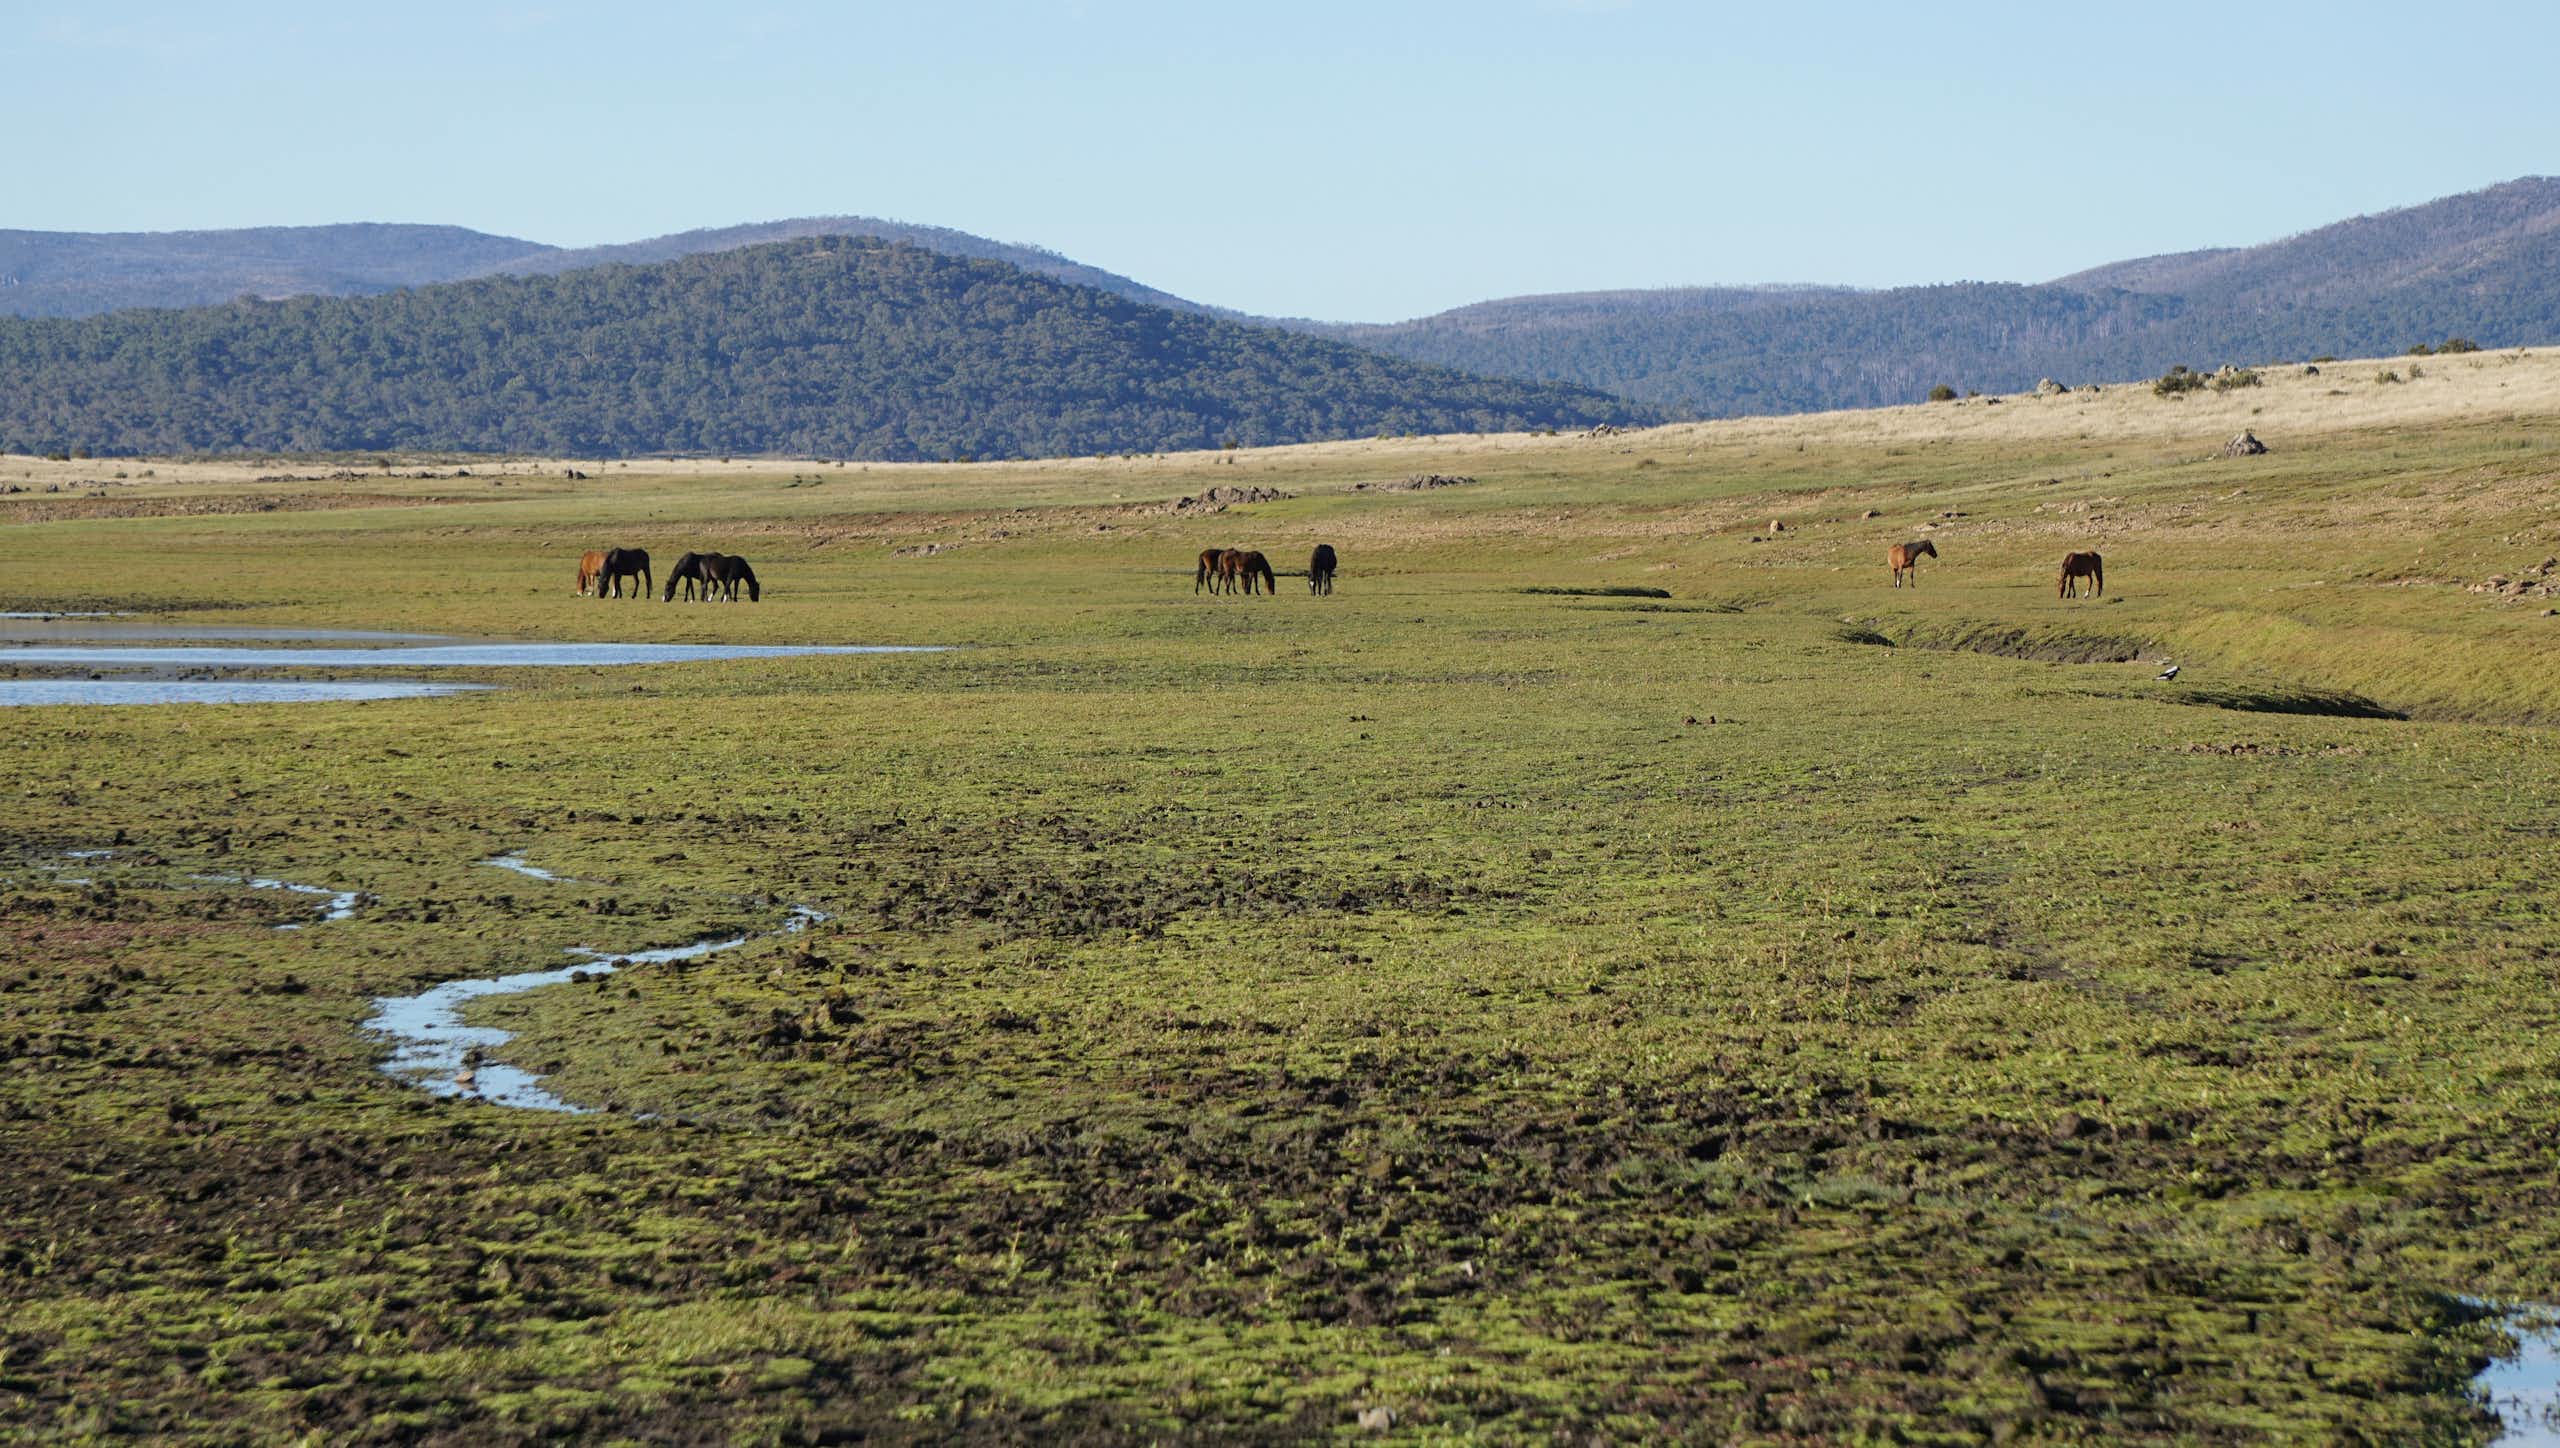 A herd of Brumbies thWild horses (brumbies) grazing in Kosciuszko National Park, showing trampled peatlands in the foreground